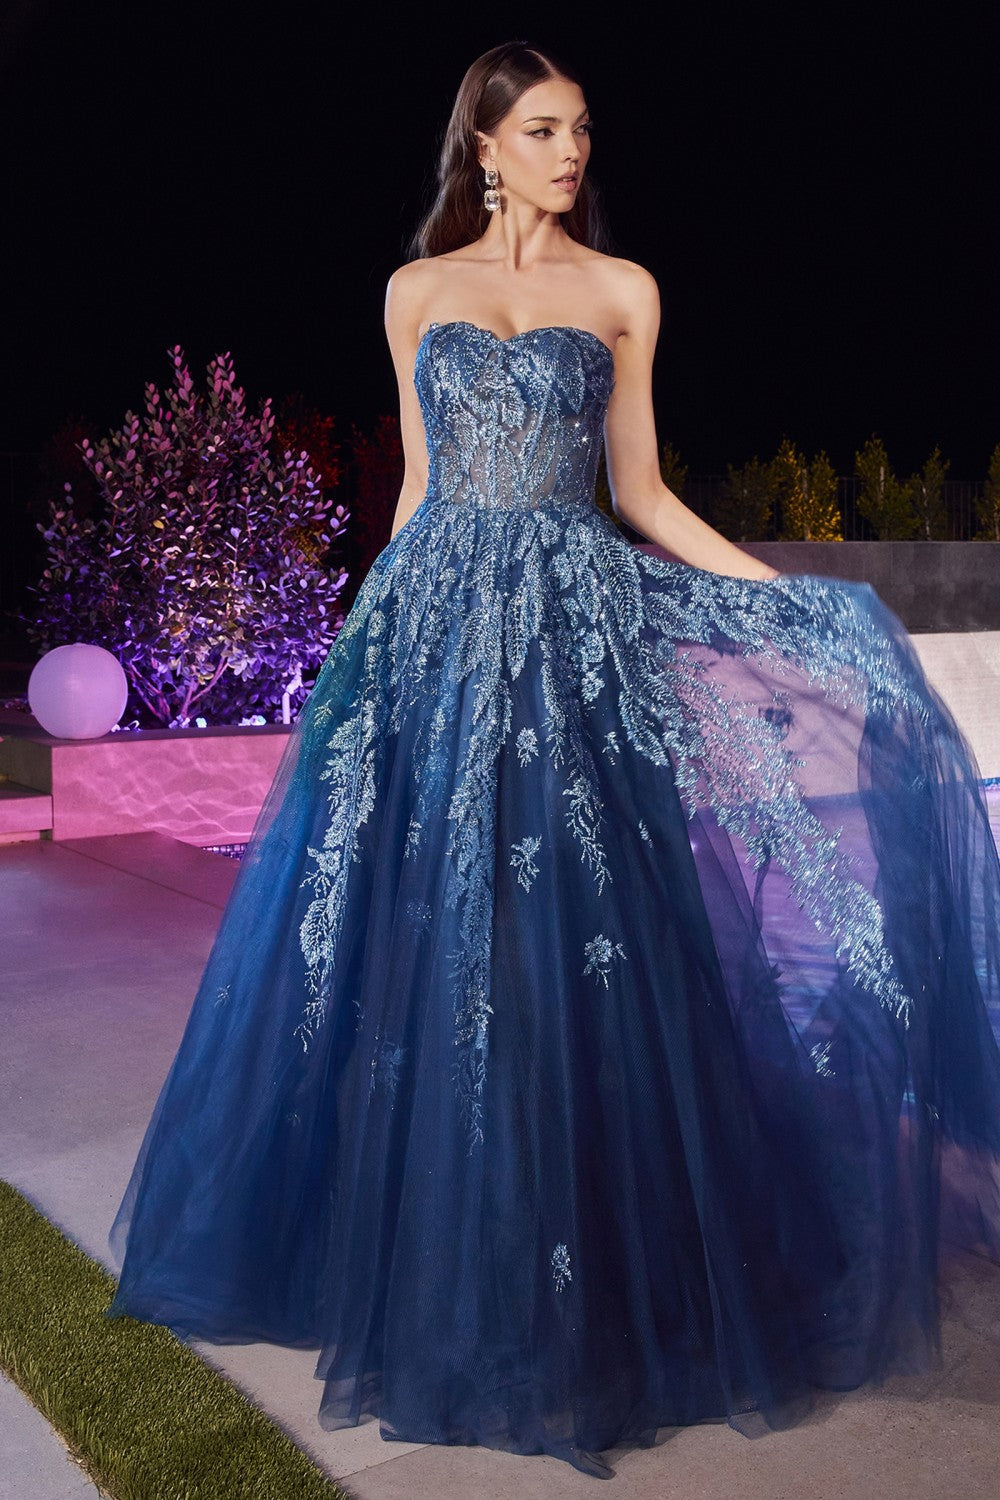 CD J852 - Glitter Print over Shimmering Tulle A-Line Prom Gown with Sheer Boned Bodice & Lace Up Corset Back PROM GOWN Cinderella Divine 2 LAPIS-BLUE 